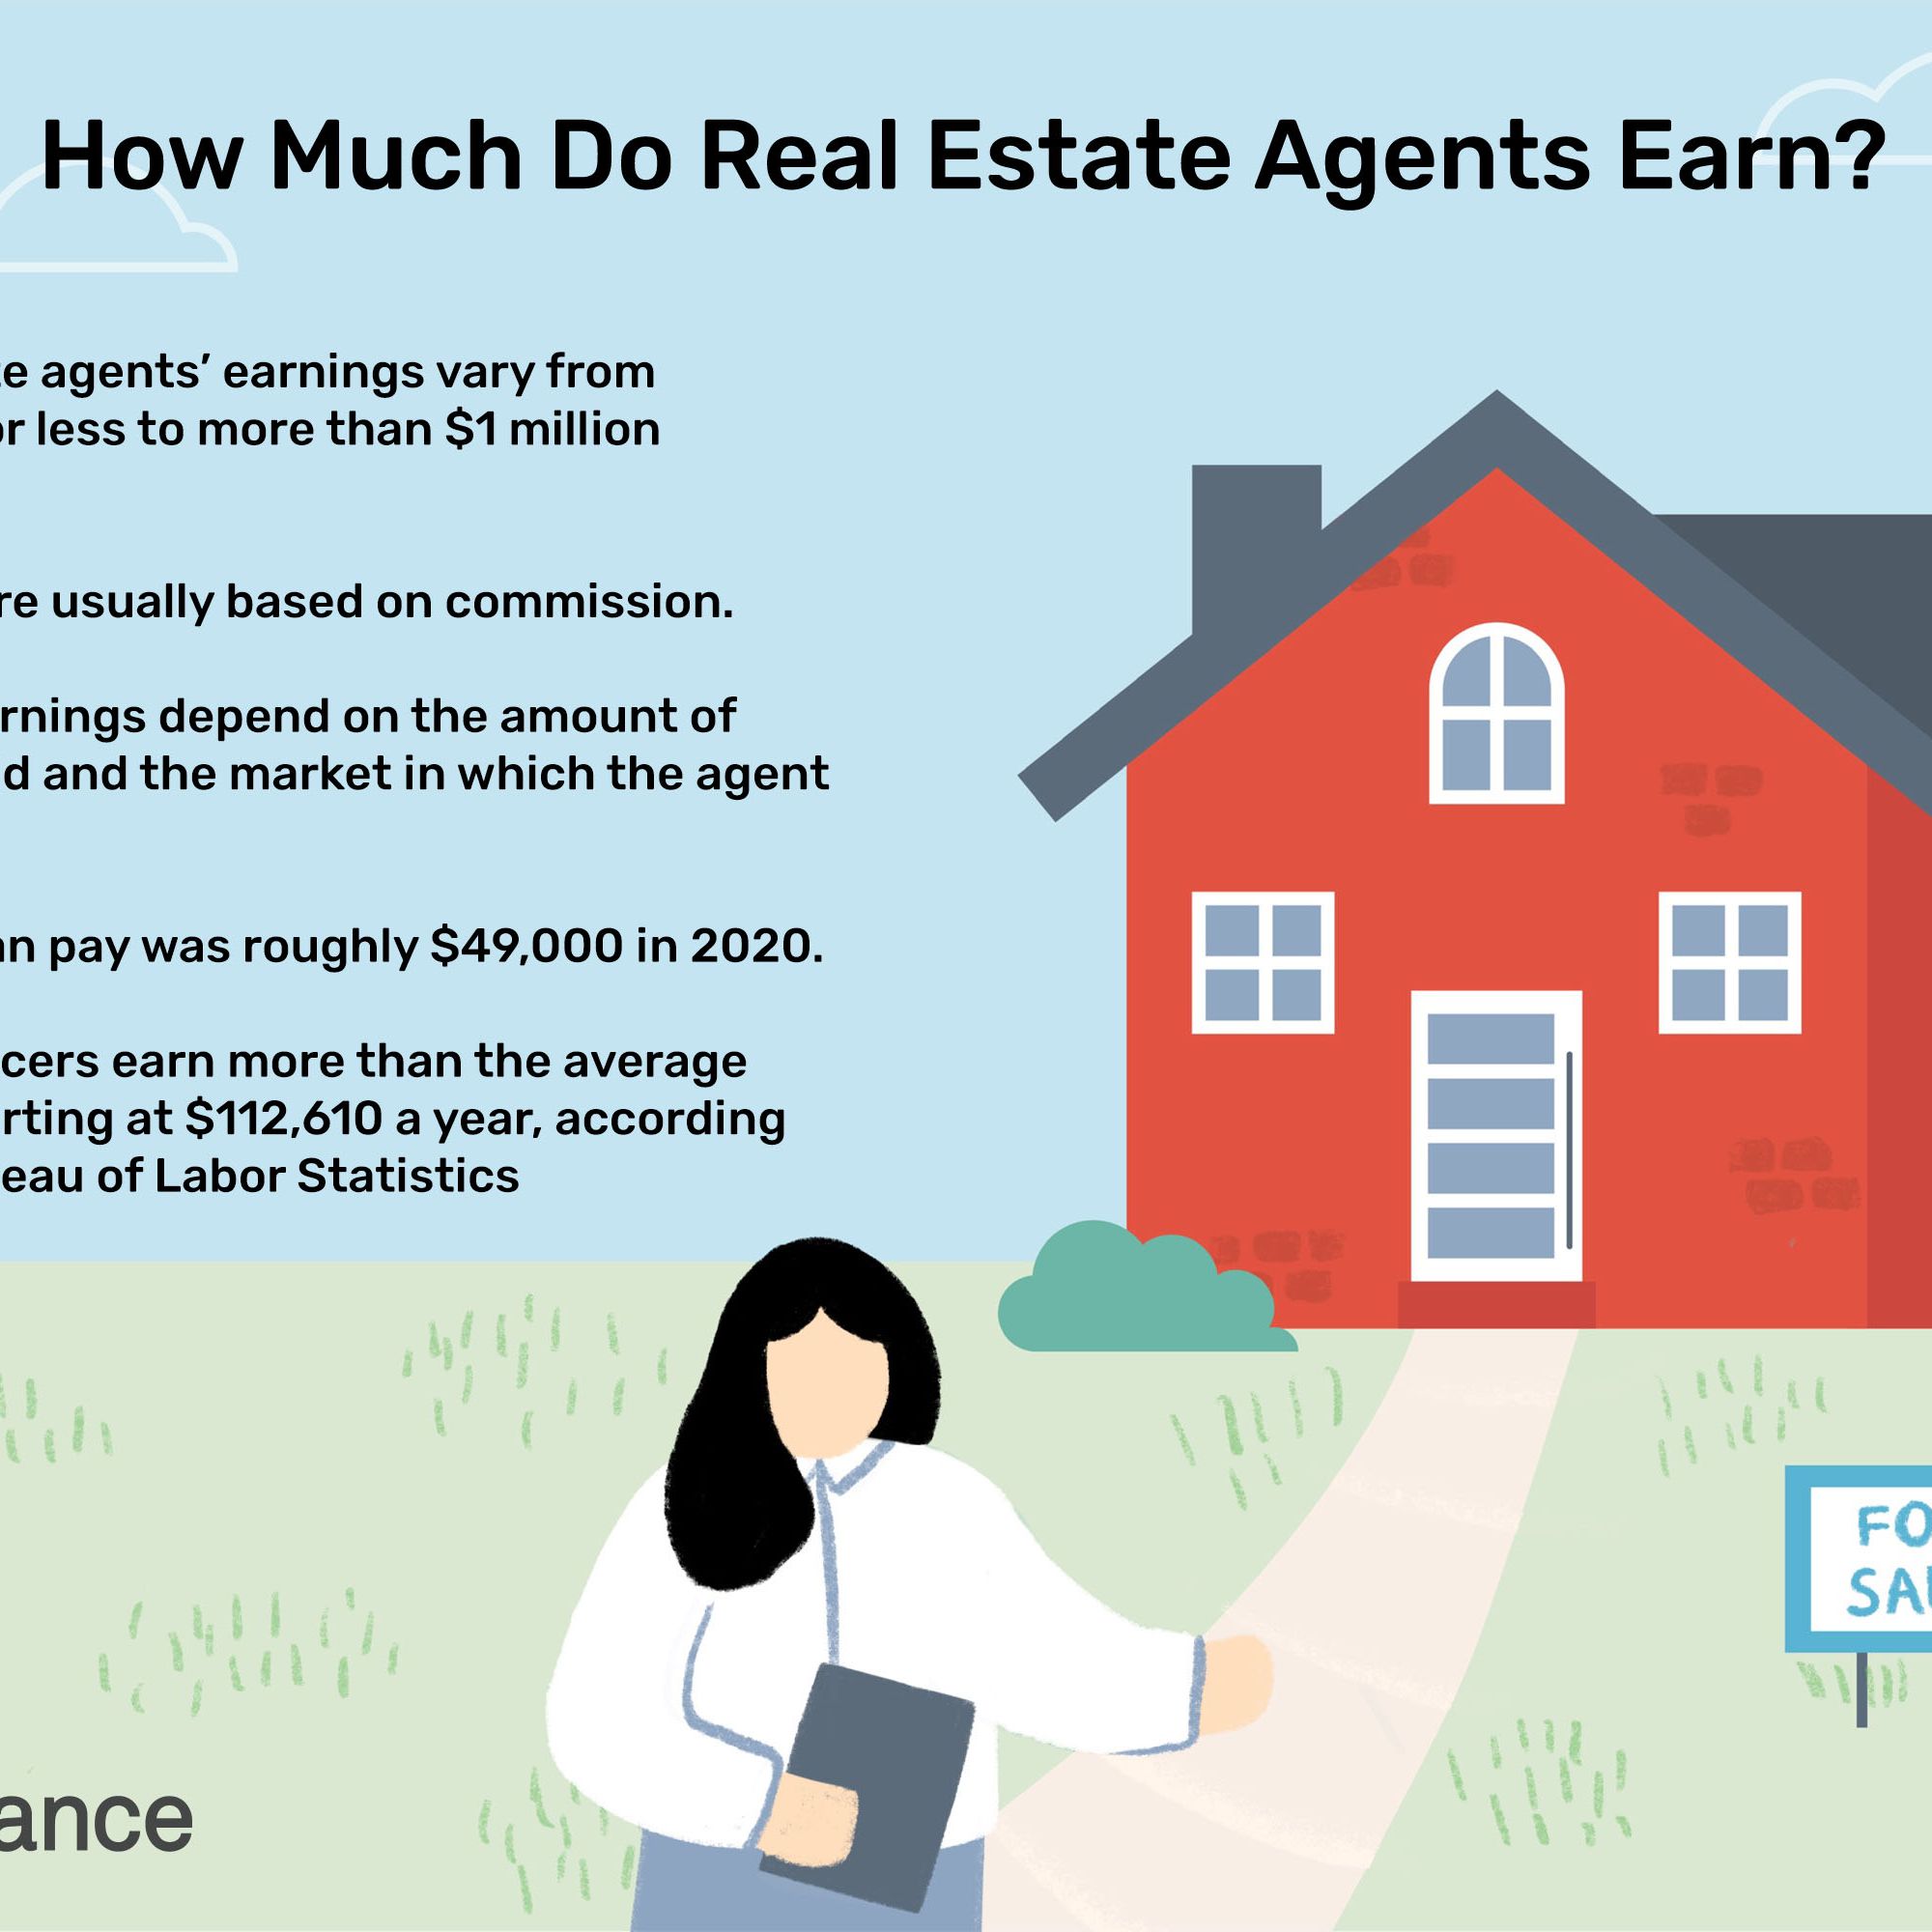 Are you able to work part-time as a real estate agent while also working full time?
